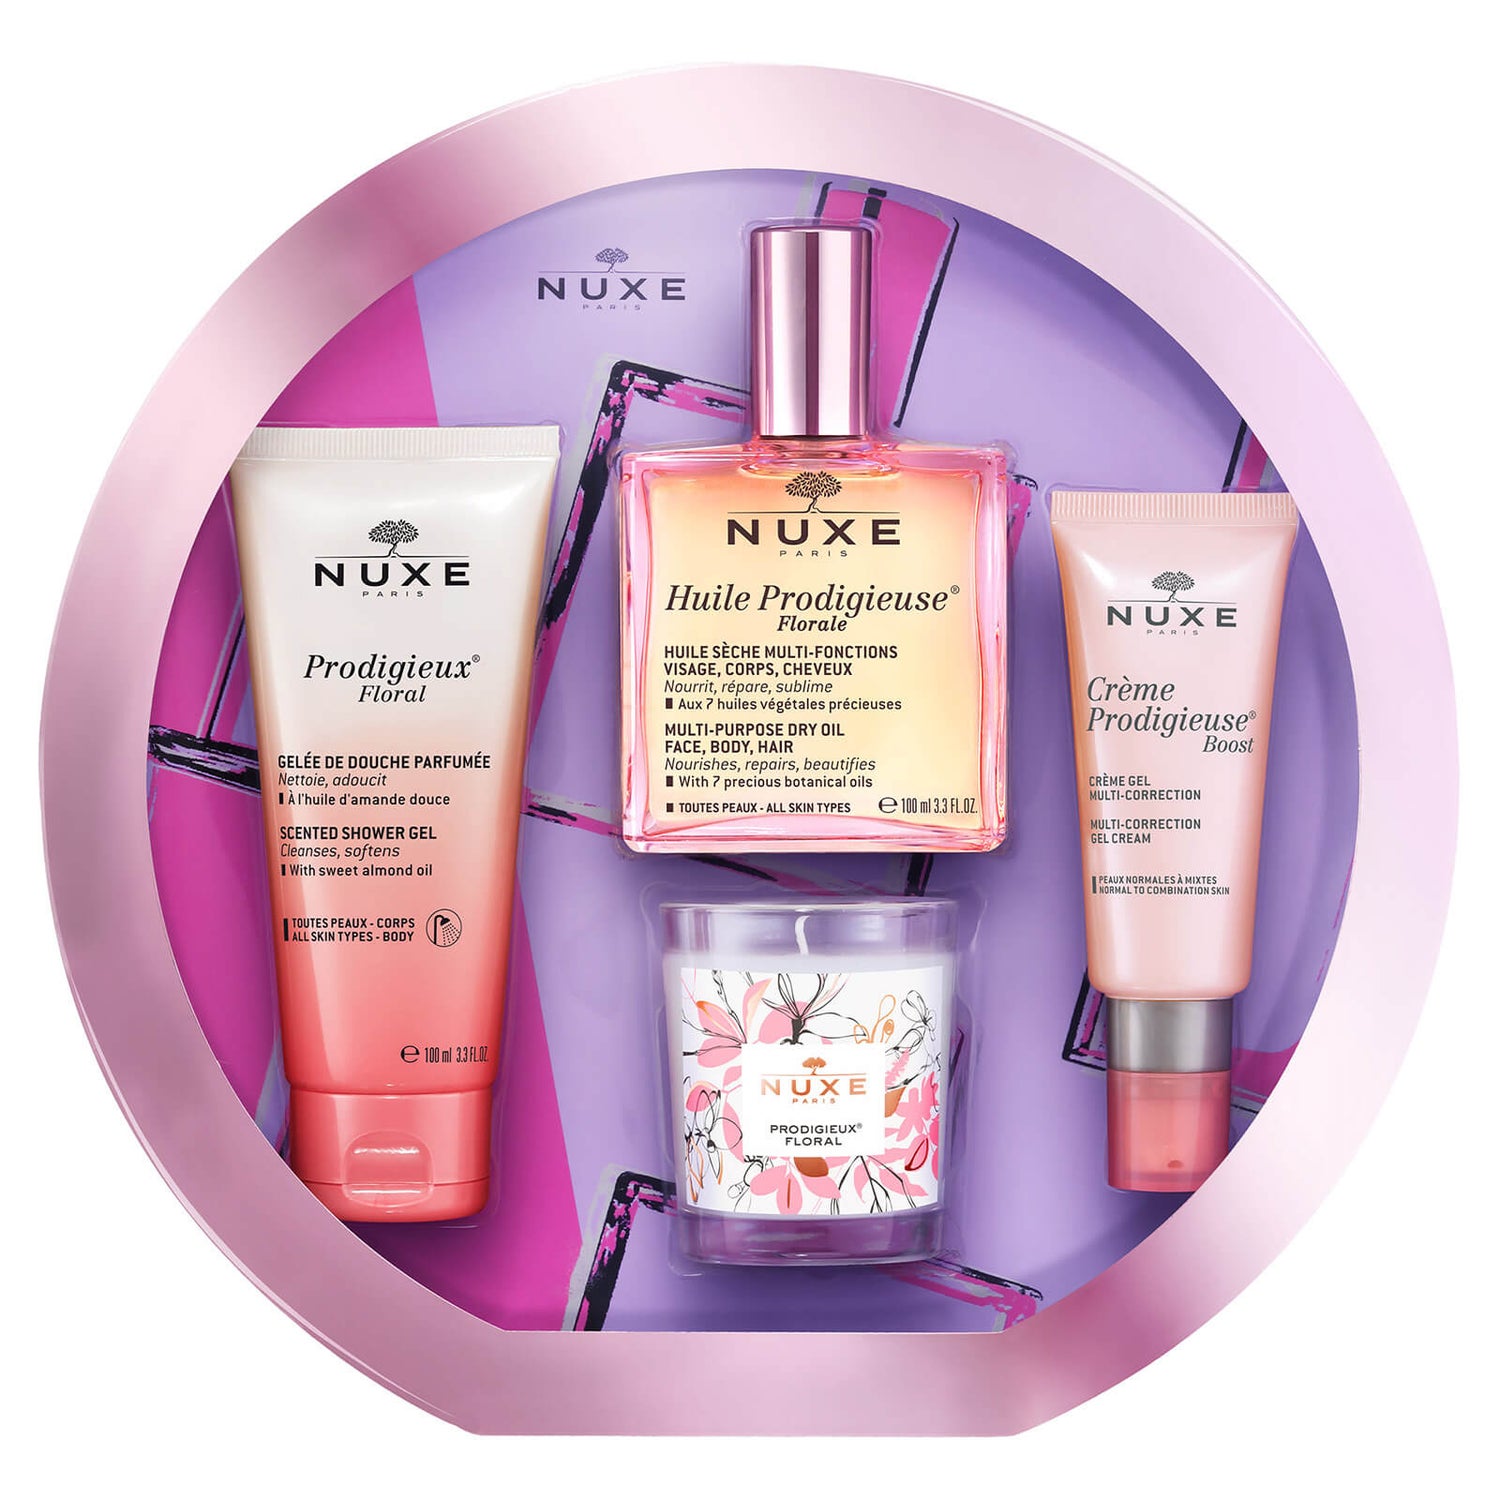 NUXE Prodigiously Floral Gift Set (Worth £65.00)